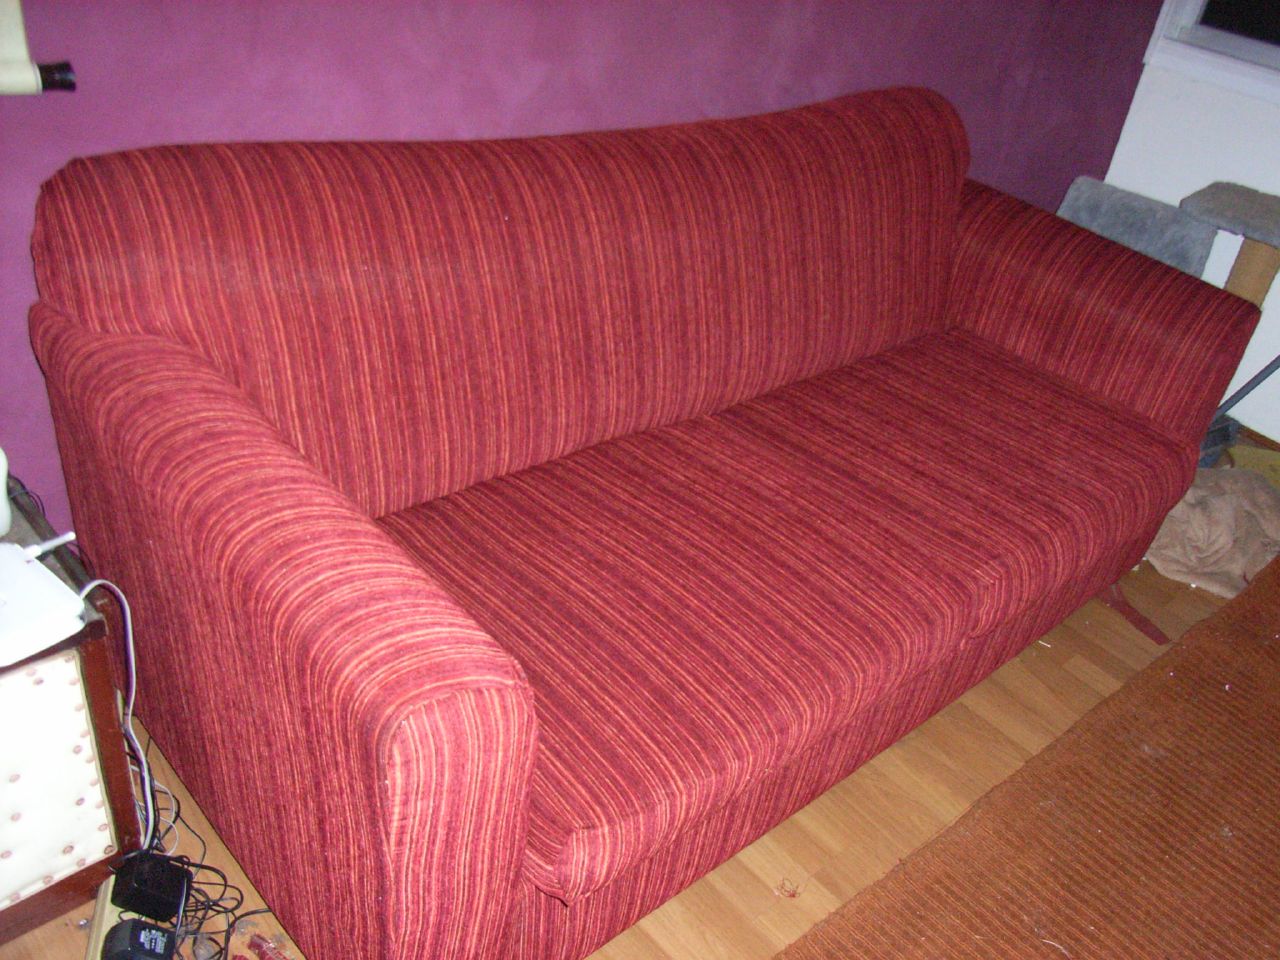 the couch is red and there are some pictures